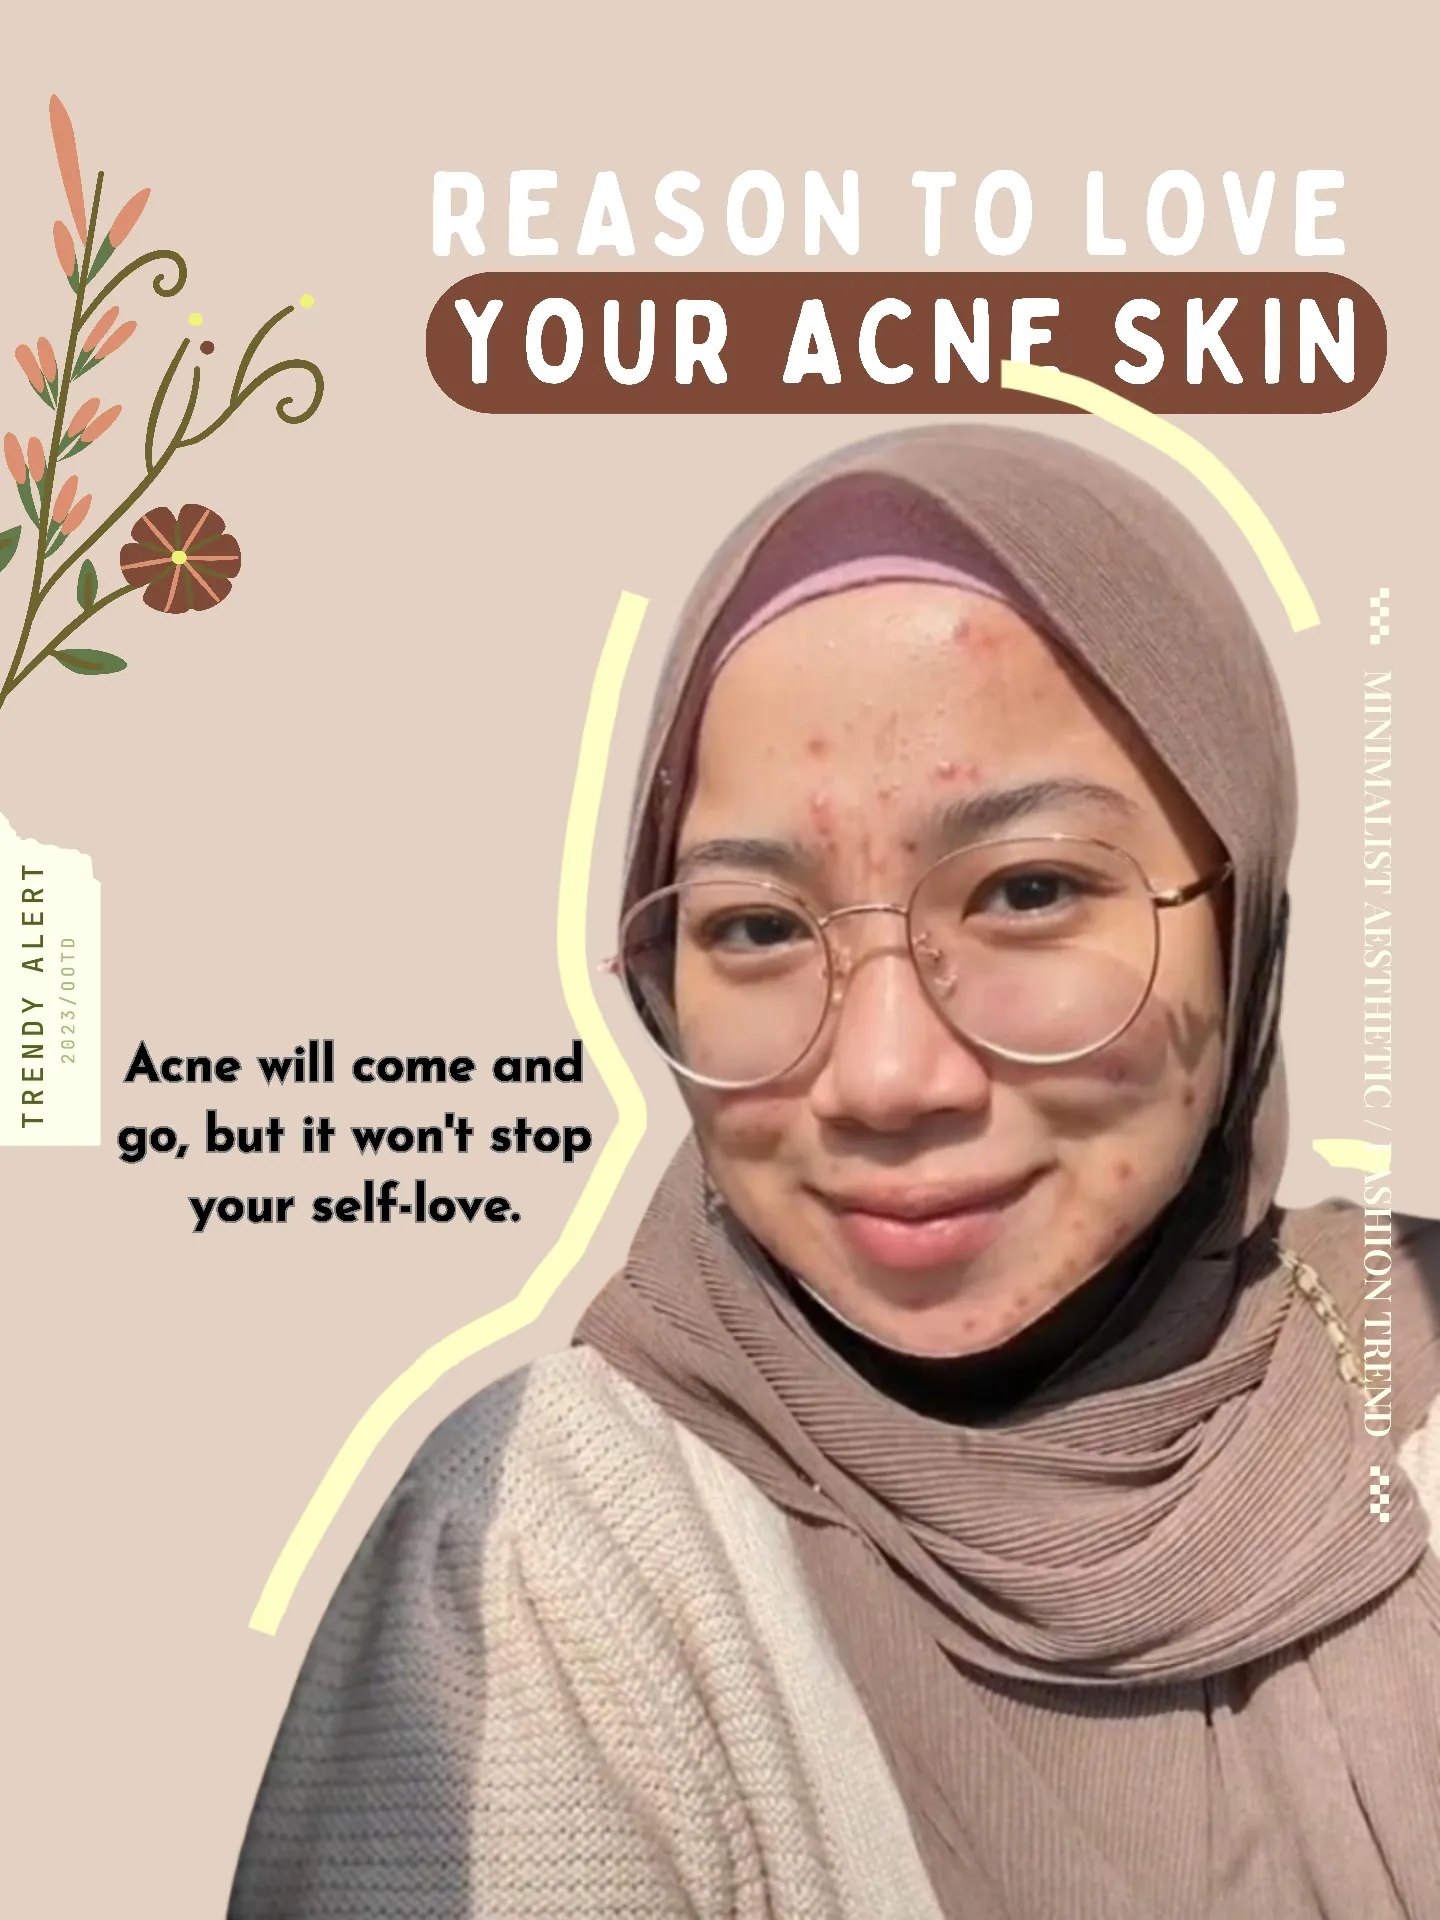 LOVE YOUR ACNE SKIN ❤️'s images